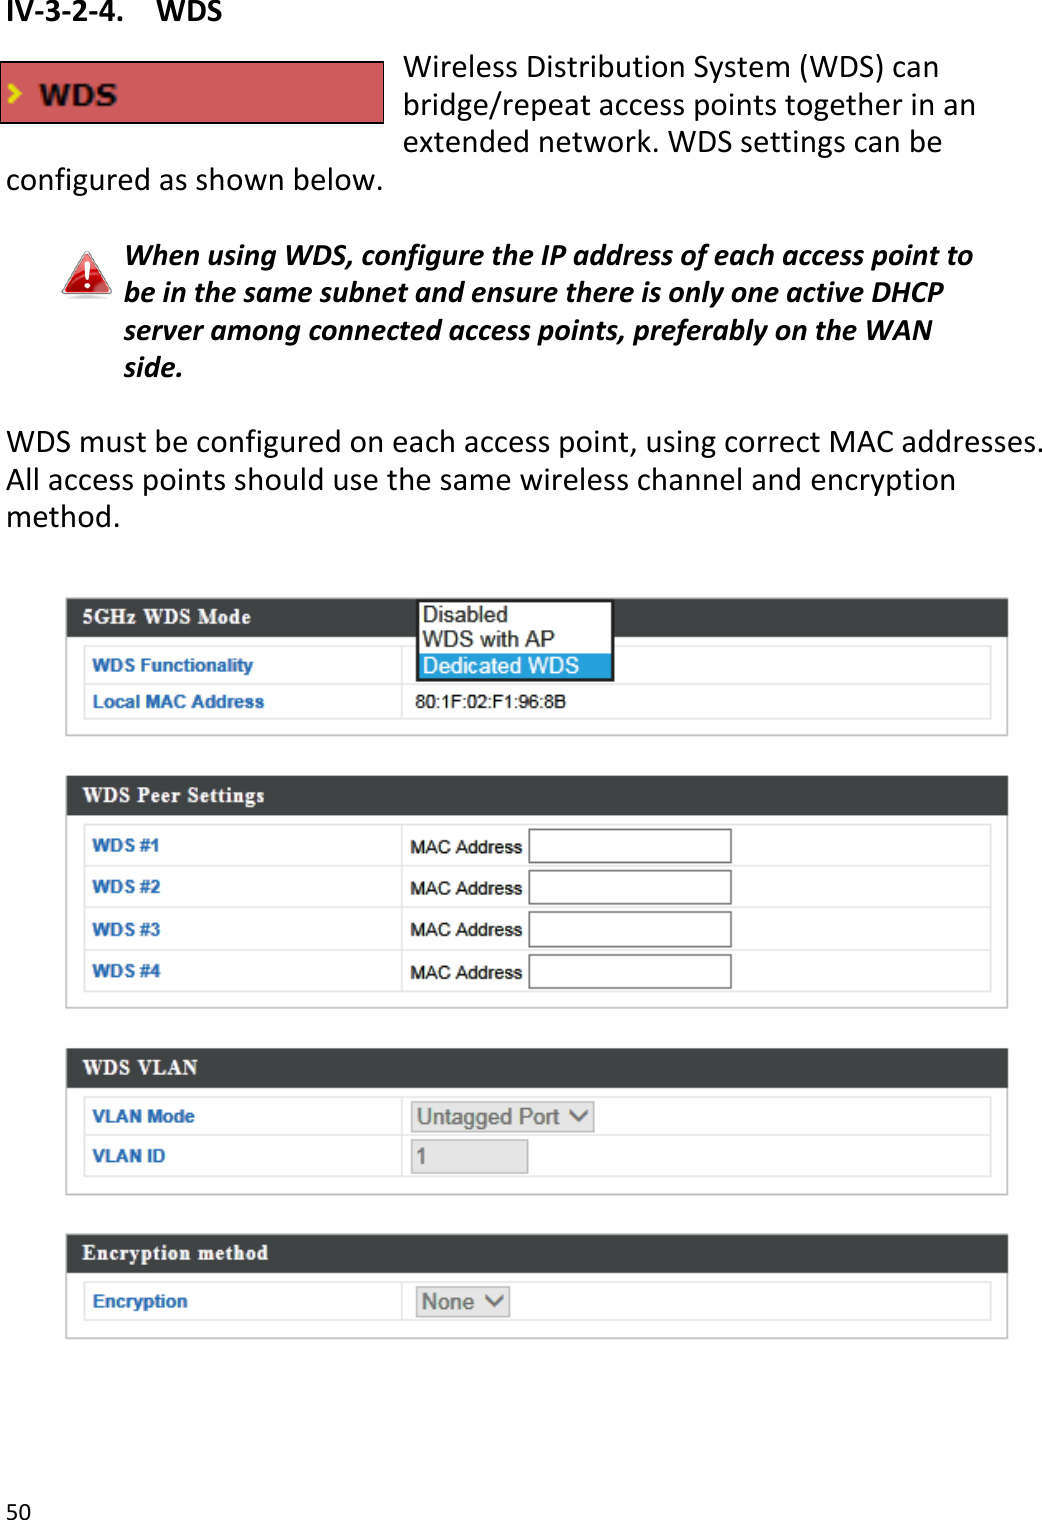 50  IV-3-2-4.  WDS Wireless Distribution System (WDS) can bridge/repeat access points together in an extended network. WDS settings can be configured as shown below.  When using WDS, configure the IP address of each access point to be in the same subnet and ensure there is only one active DHCP server among connected access points, preferably on the WAN side.  WDS must be configured on each access point, using correct MAC addresses. All access points should use the same wireless channel and encryption method.      